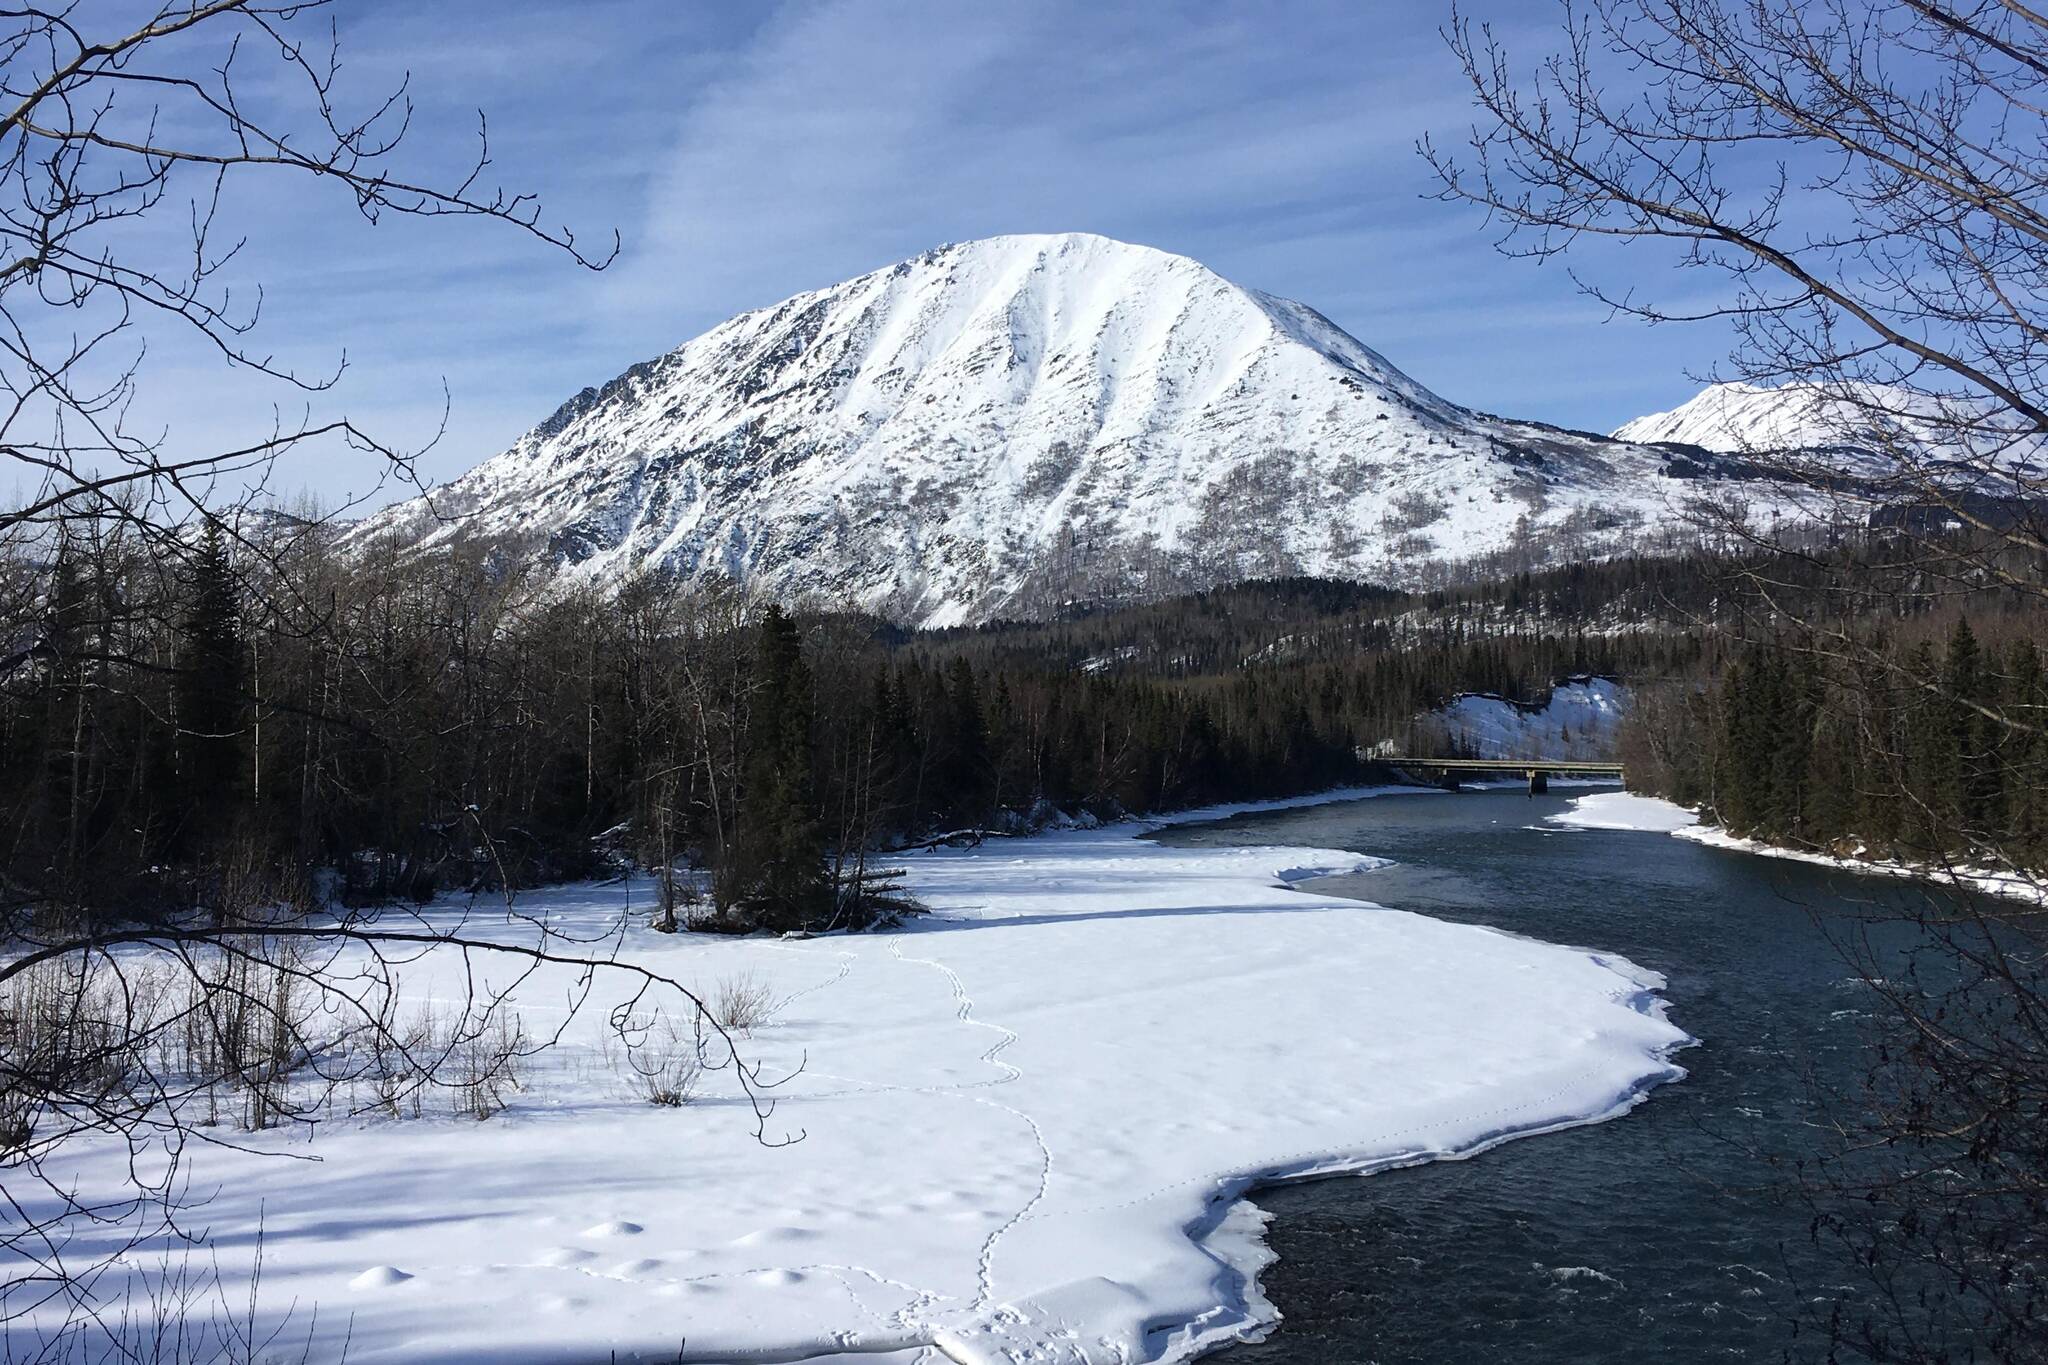 The Sterling Highway crosses the Kenai River near the Russian River Campground on March 15, 2020, near Cooper Landing, Alaska. (Jeff Helminiak/Peninsula Clarion)